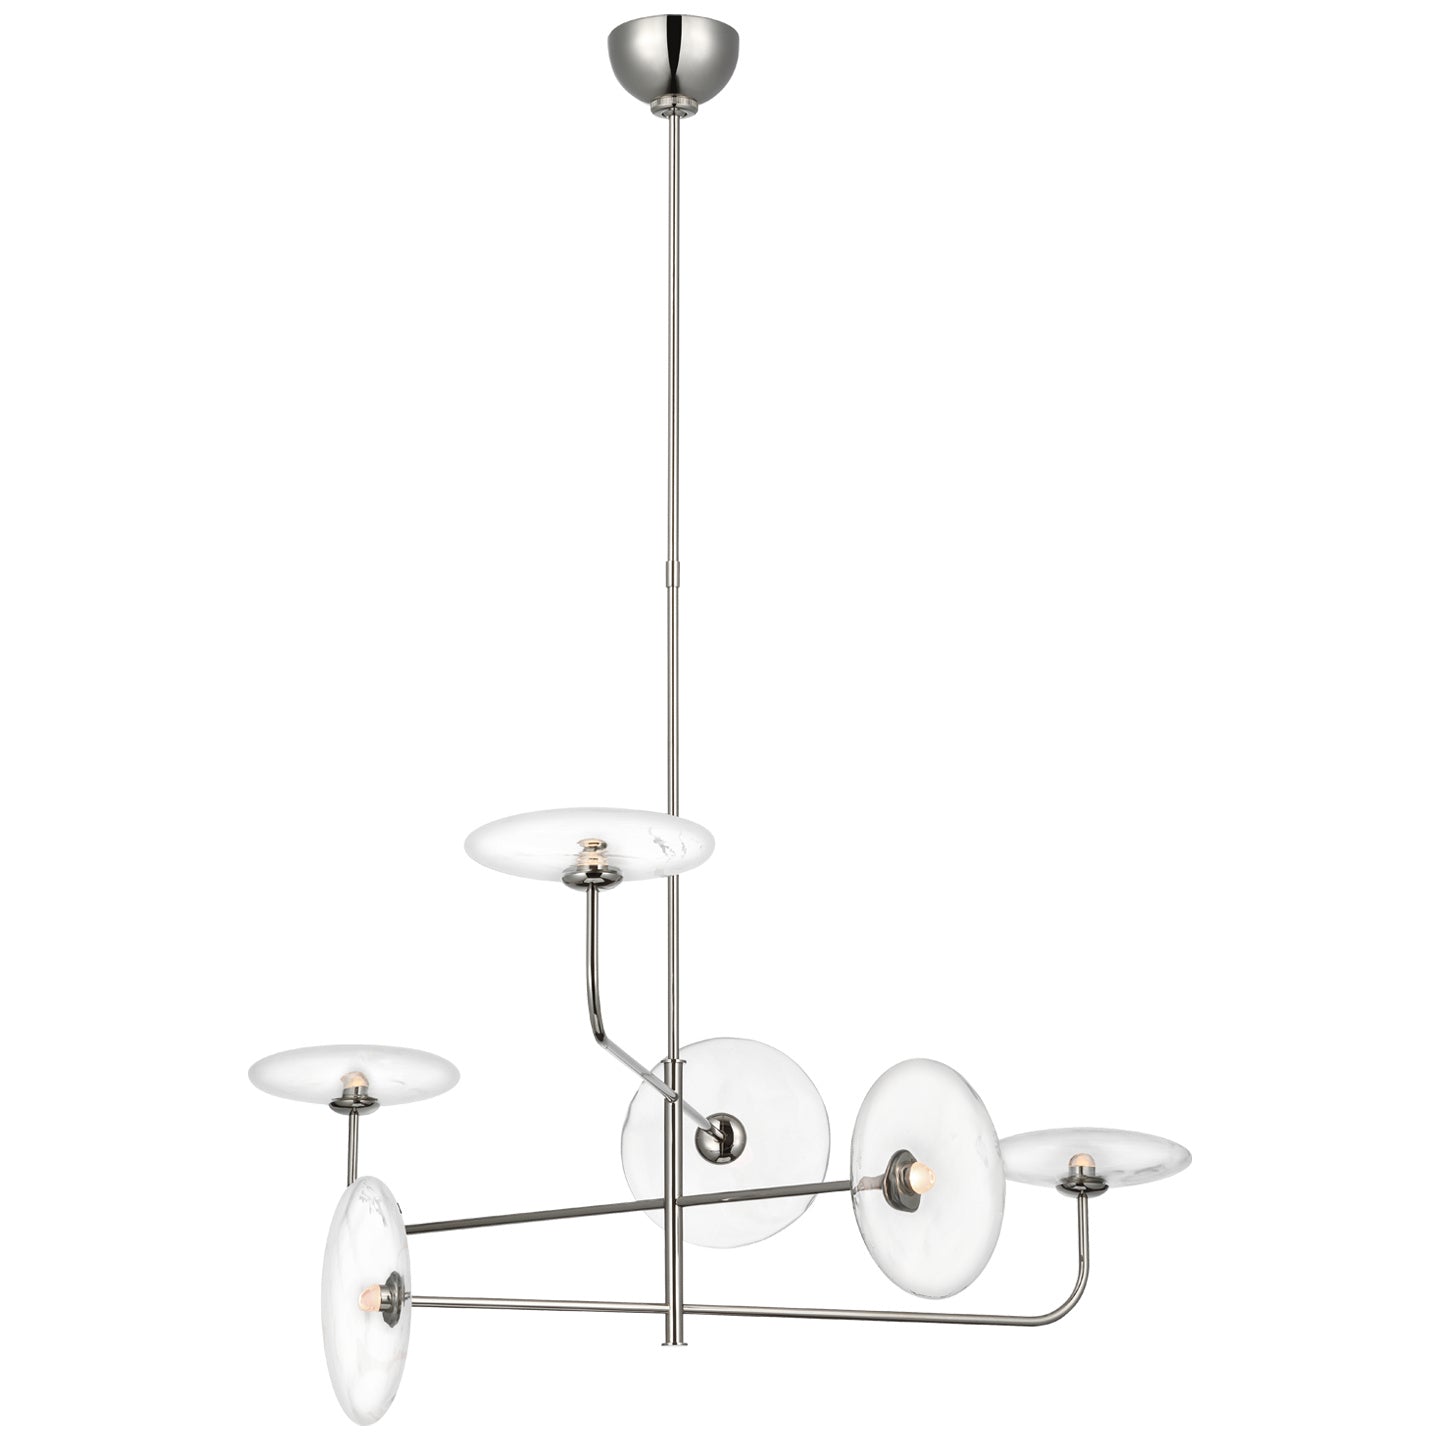 Load image into Gallery viewer, Visual Comfort Signature - S 5692PN-CG - LED Chandelier - Calvino - Polished Nickel
